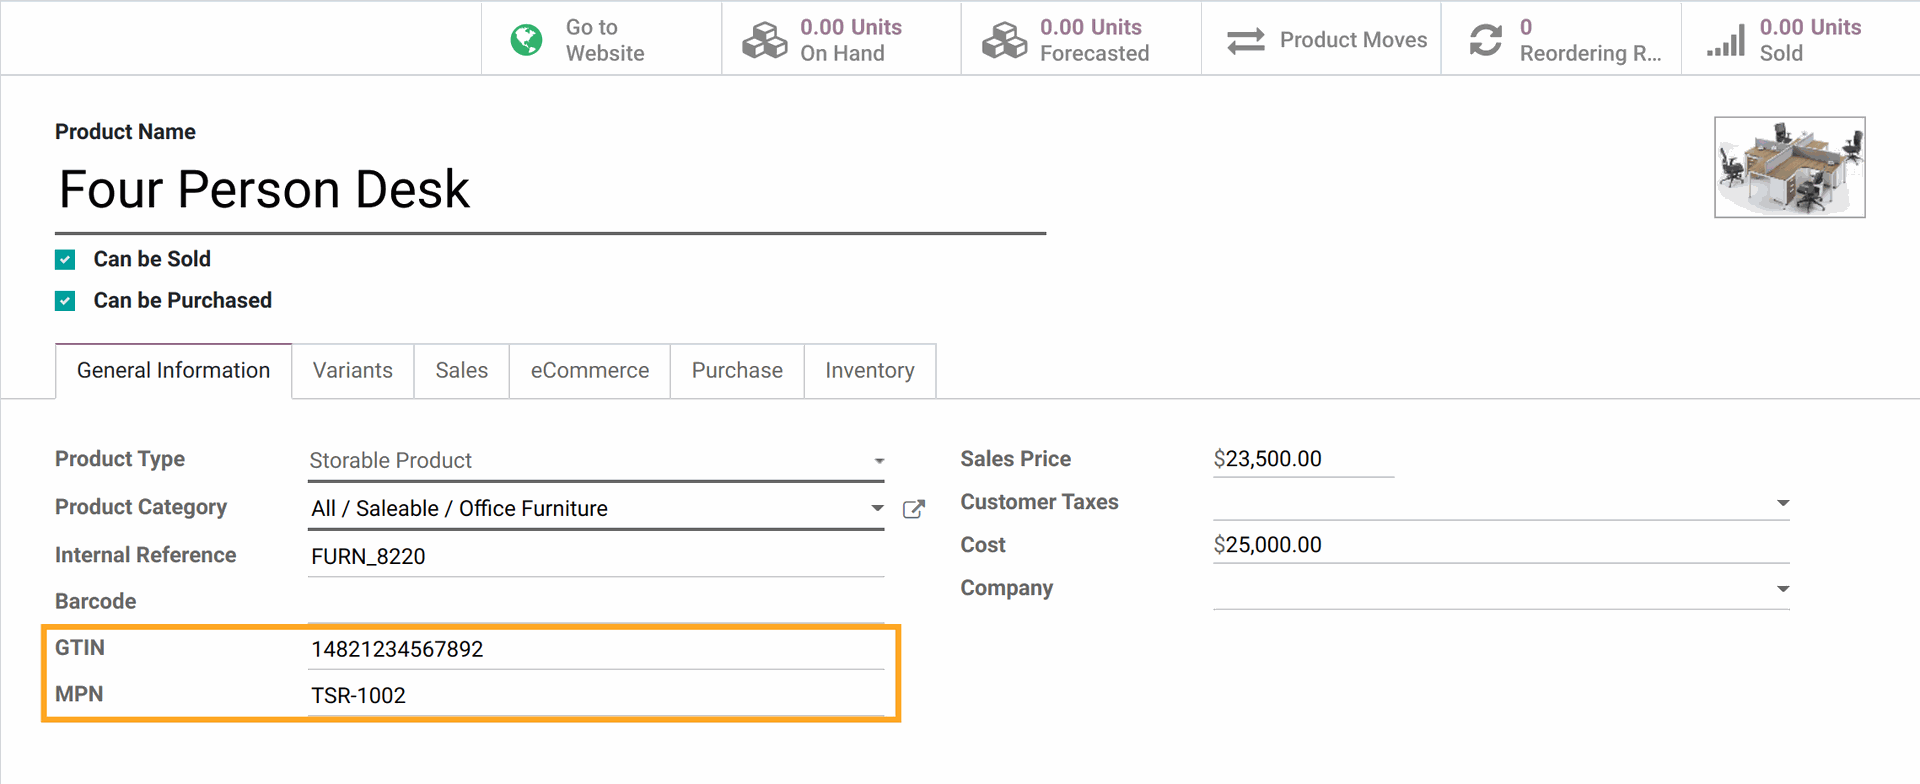 Odoo False Number Fields for Product Data Feeds